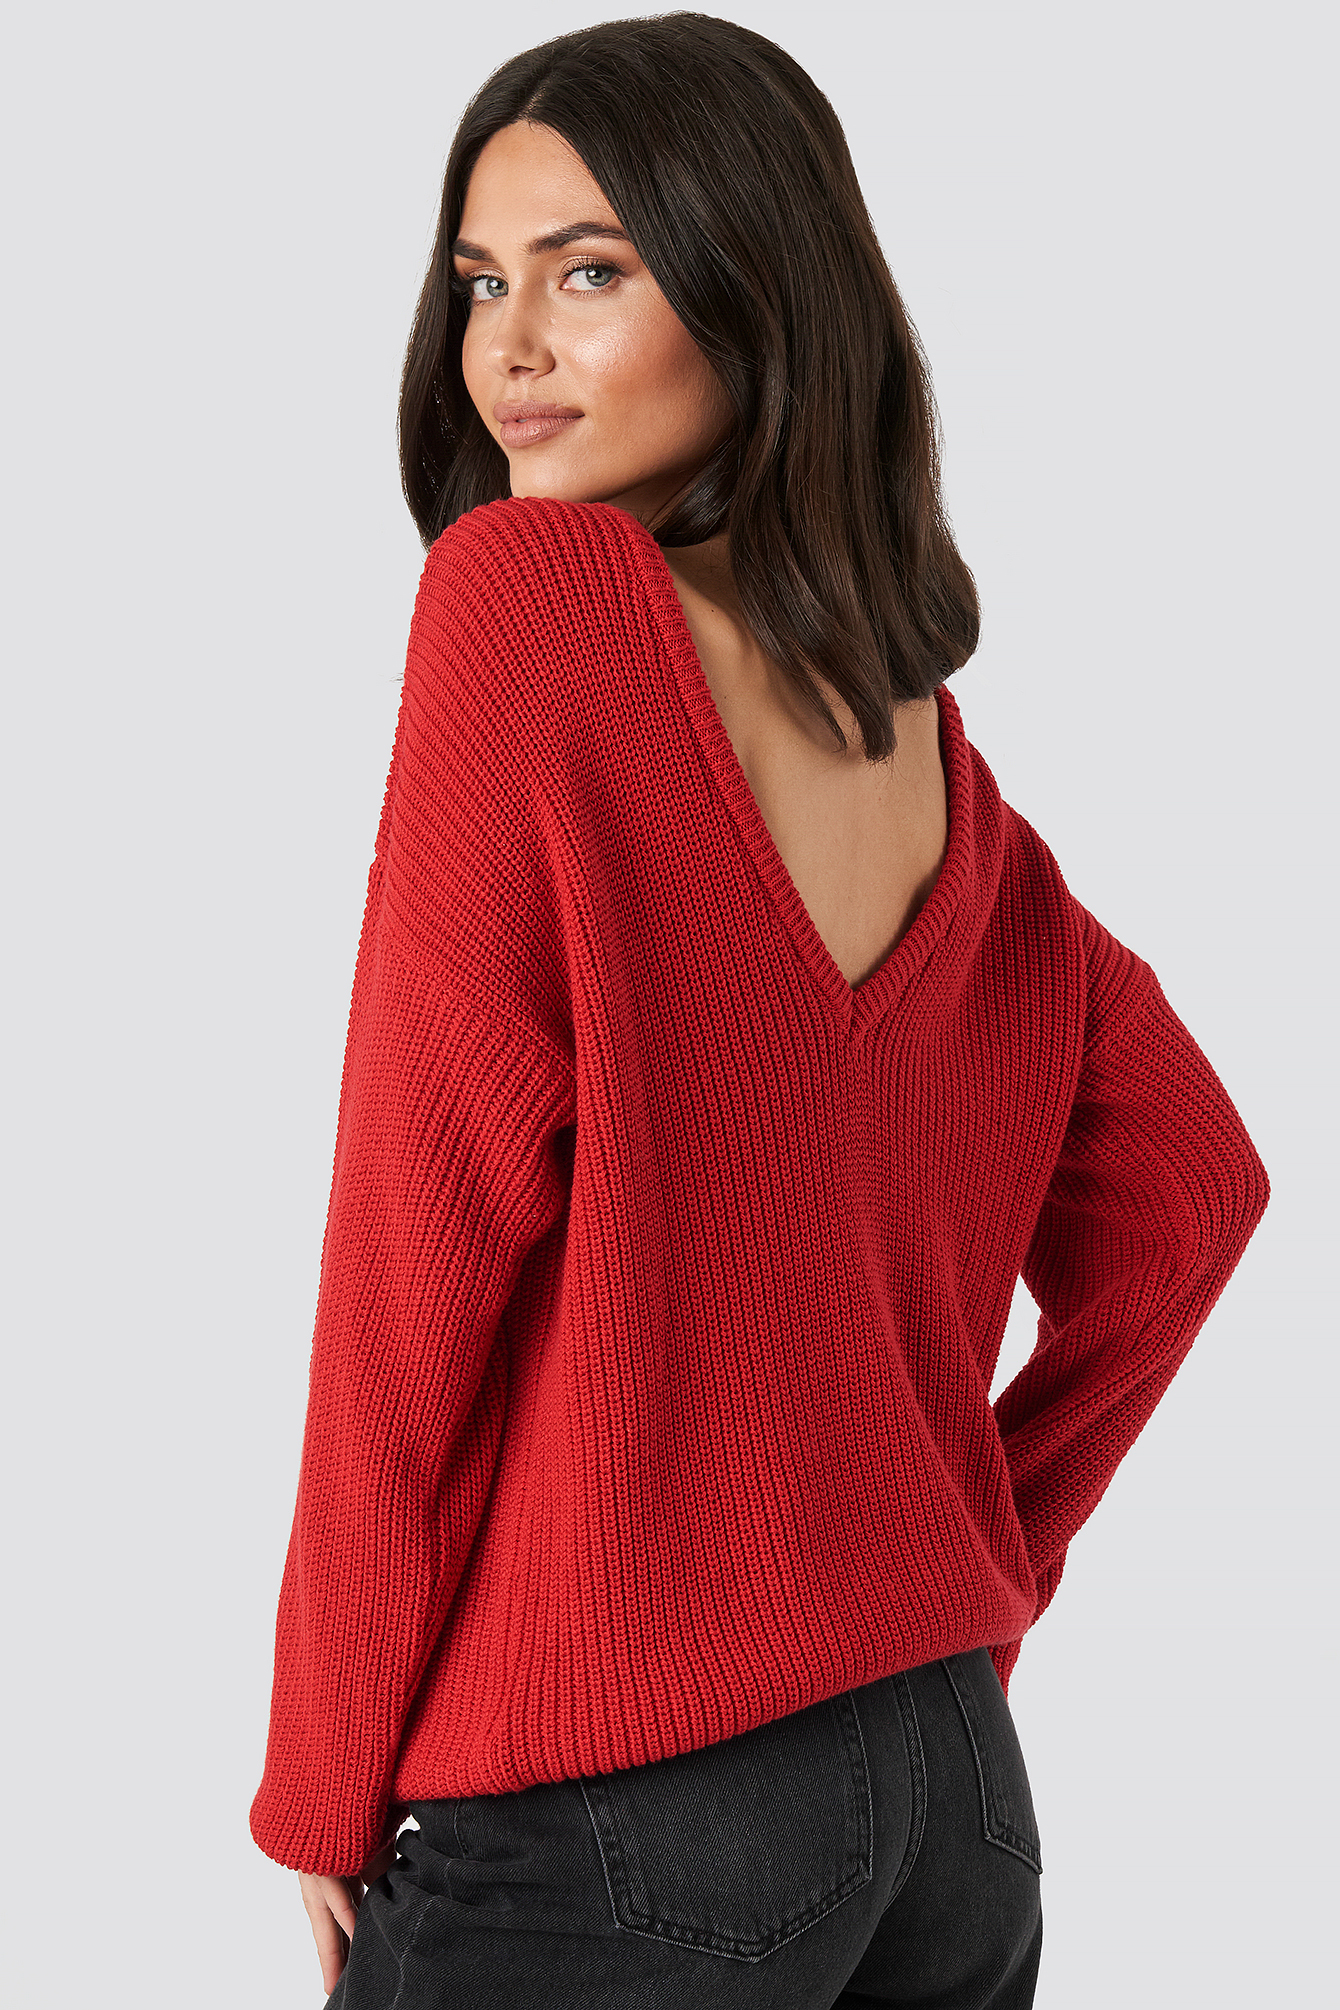 Poppy Red Knitted Deep V-neck Sweater